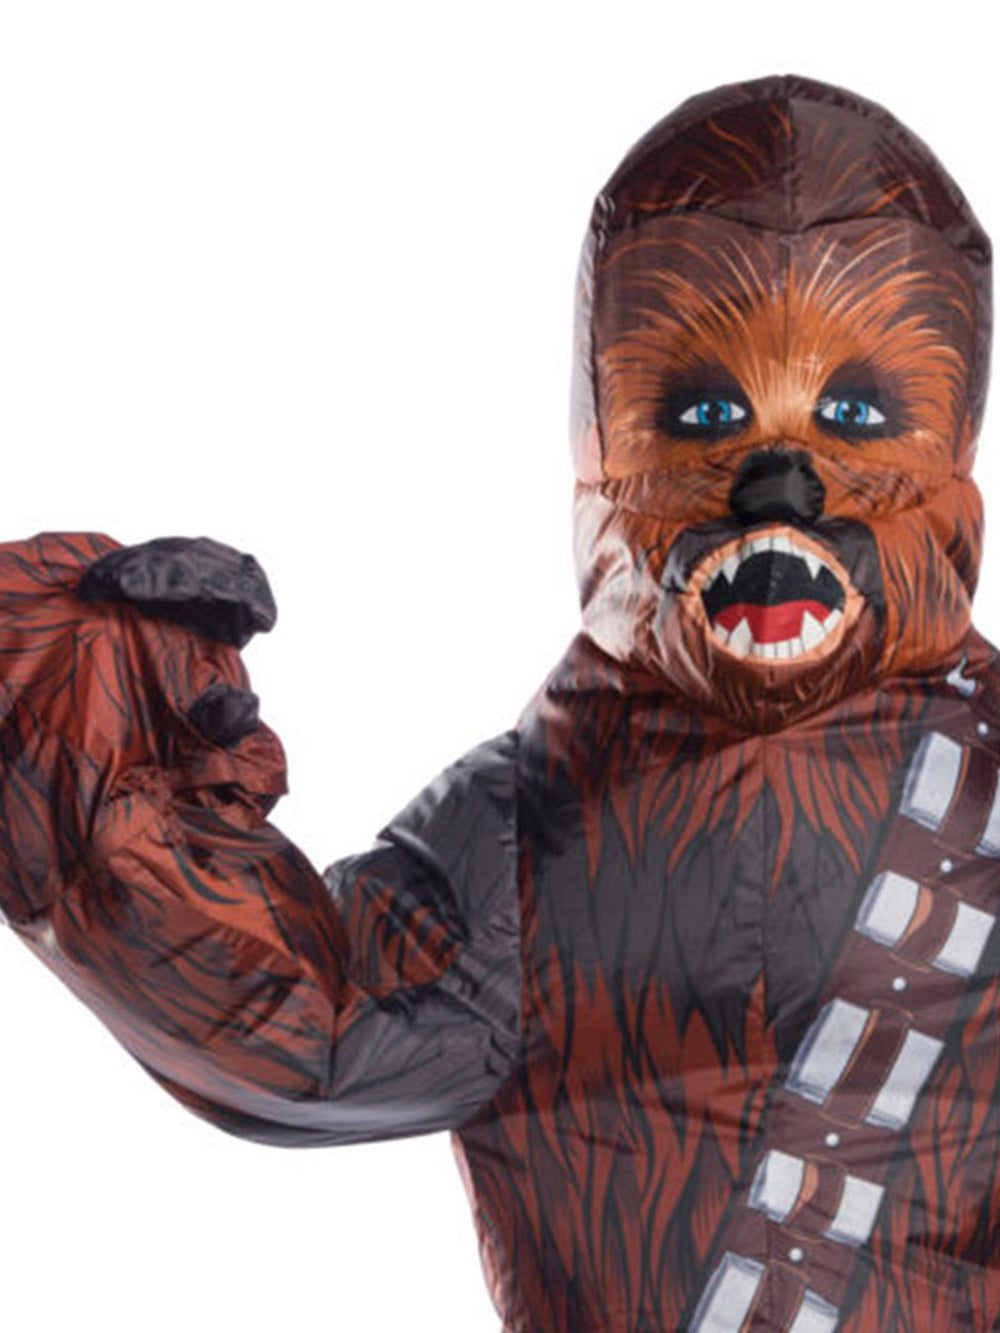 CHEWBACCA INFLATABLE COSTUME, ADULT - Little Shop of Horrors